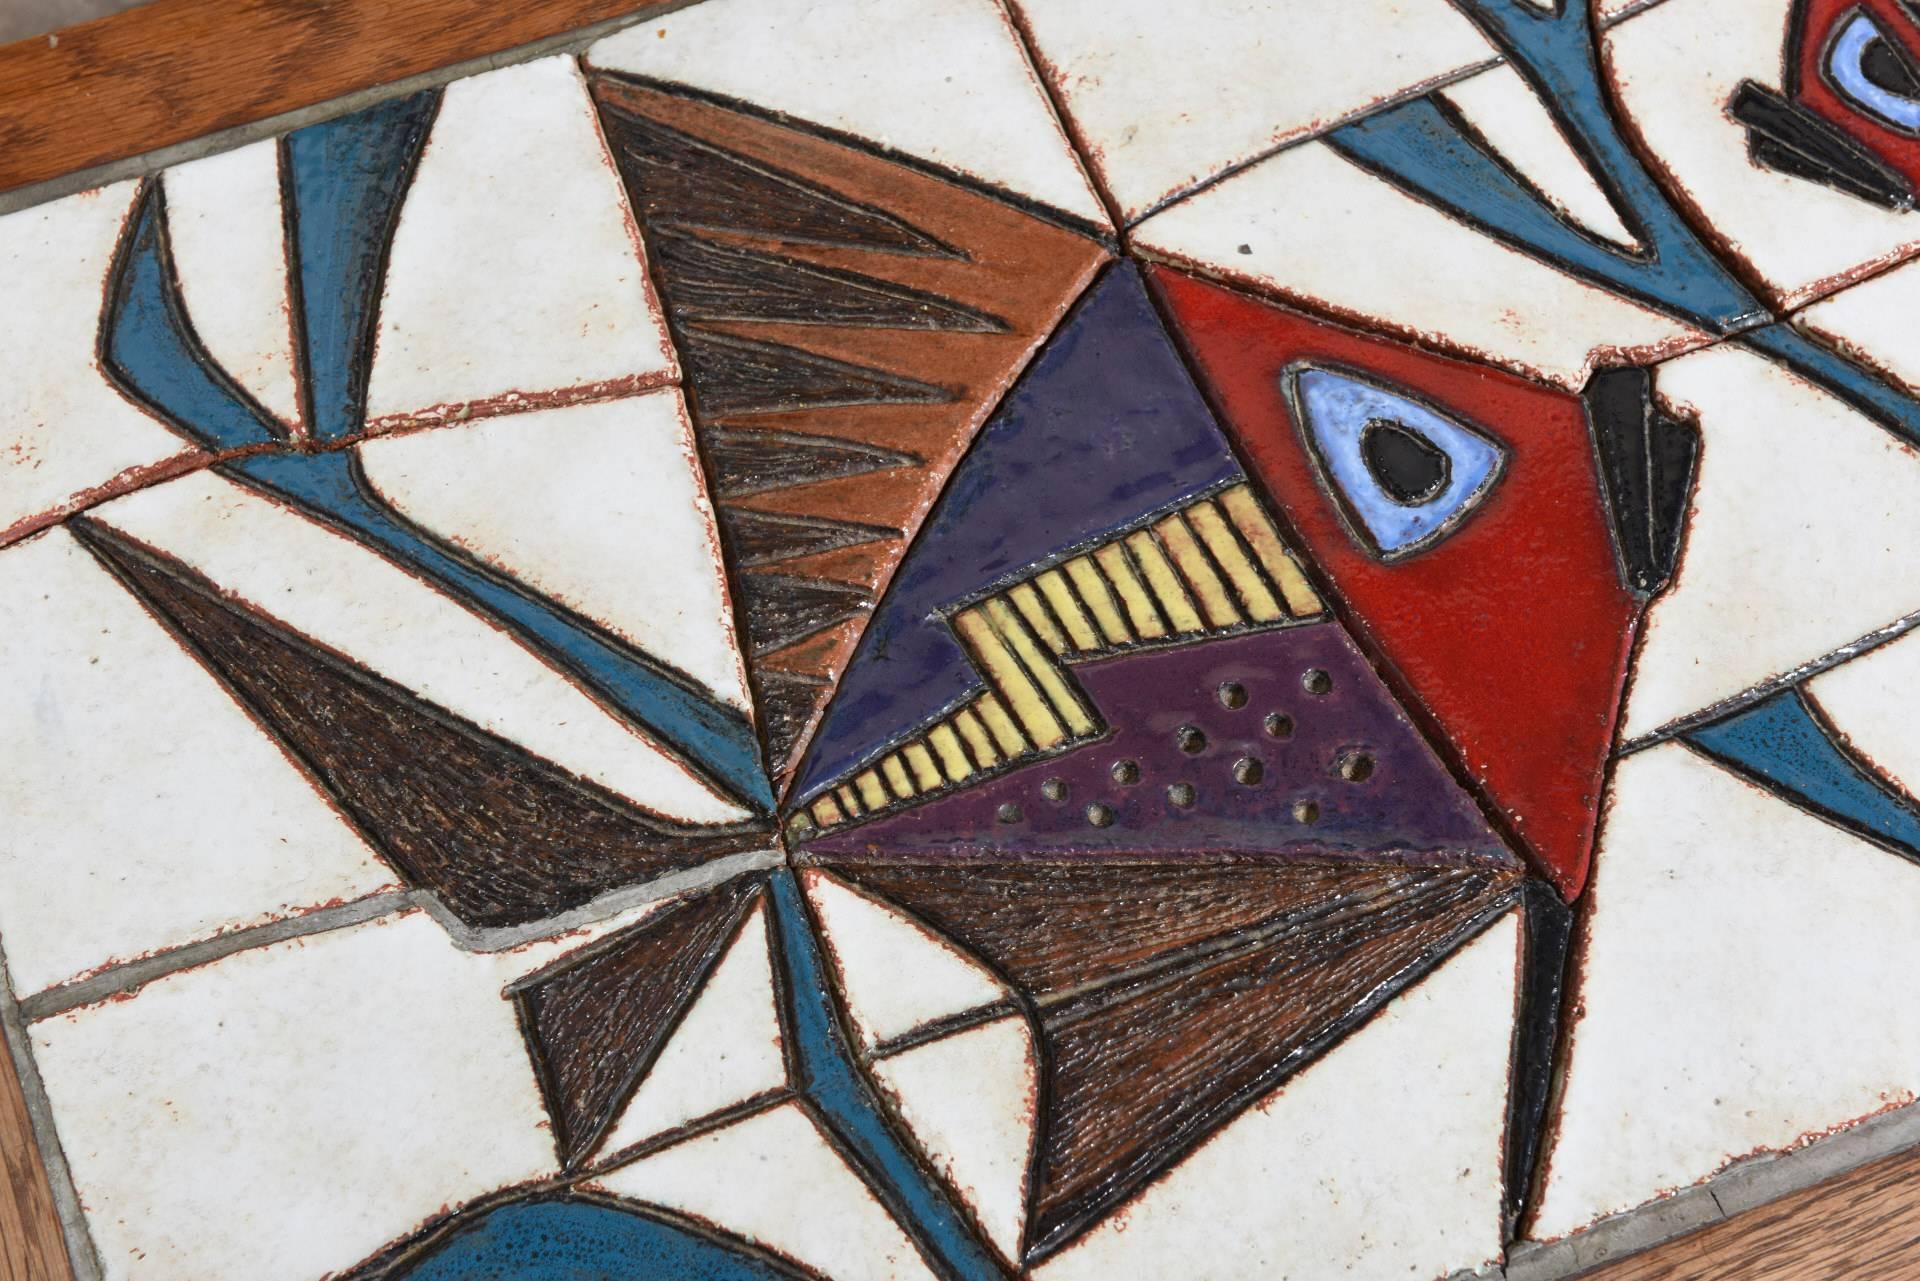 Stunning decor of stylized fish in graffito technique in glazed tiles with a teak framework on a metal black lacquered frame made by Belgian artist Paul Vermeire from Oostende. (1928-1974)

Vermeire was a student of Joost Marechal and also worked